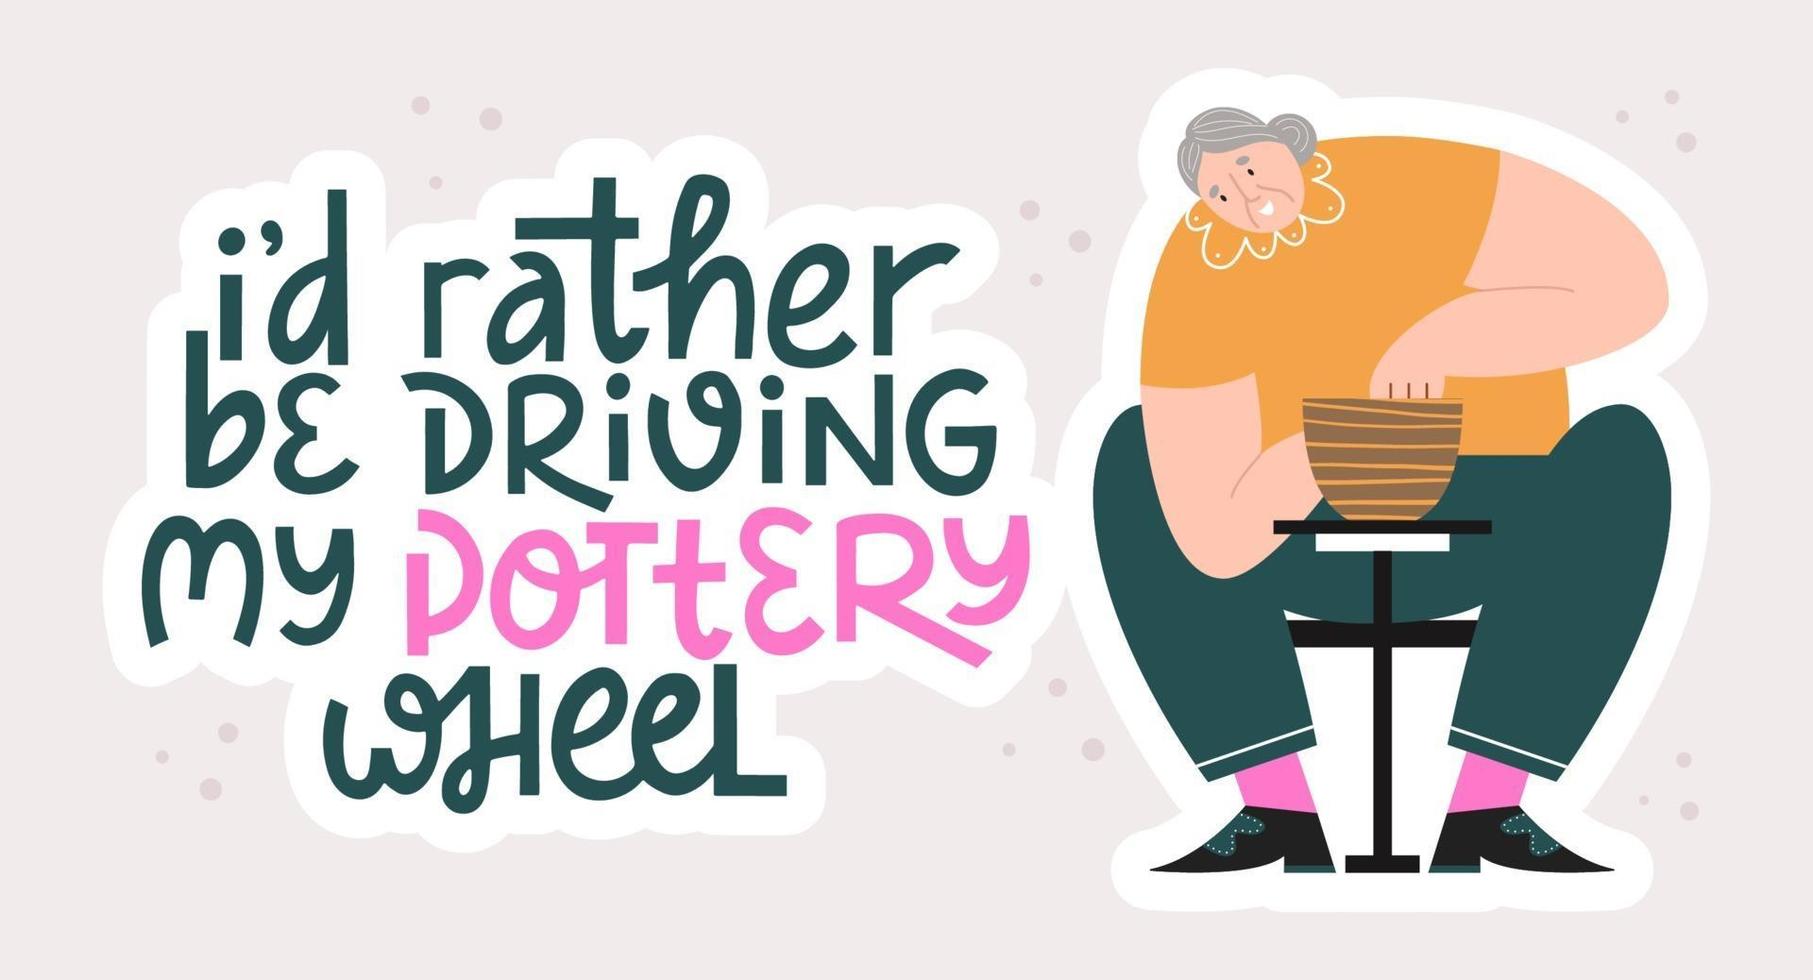 Pottery quote and old woman vector illustration.